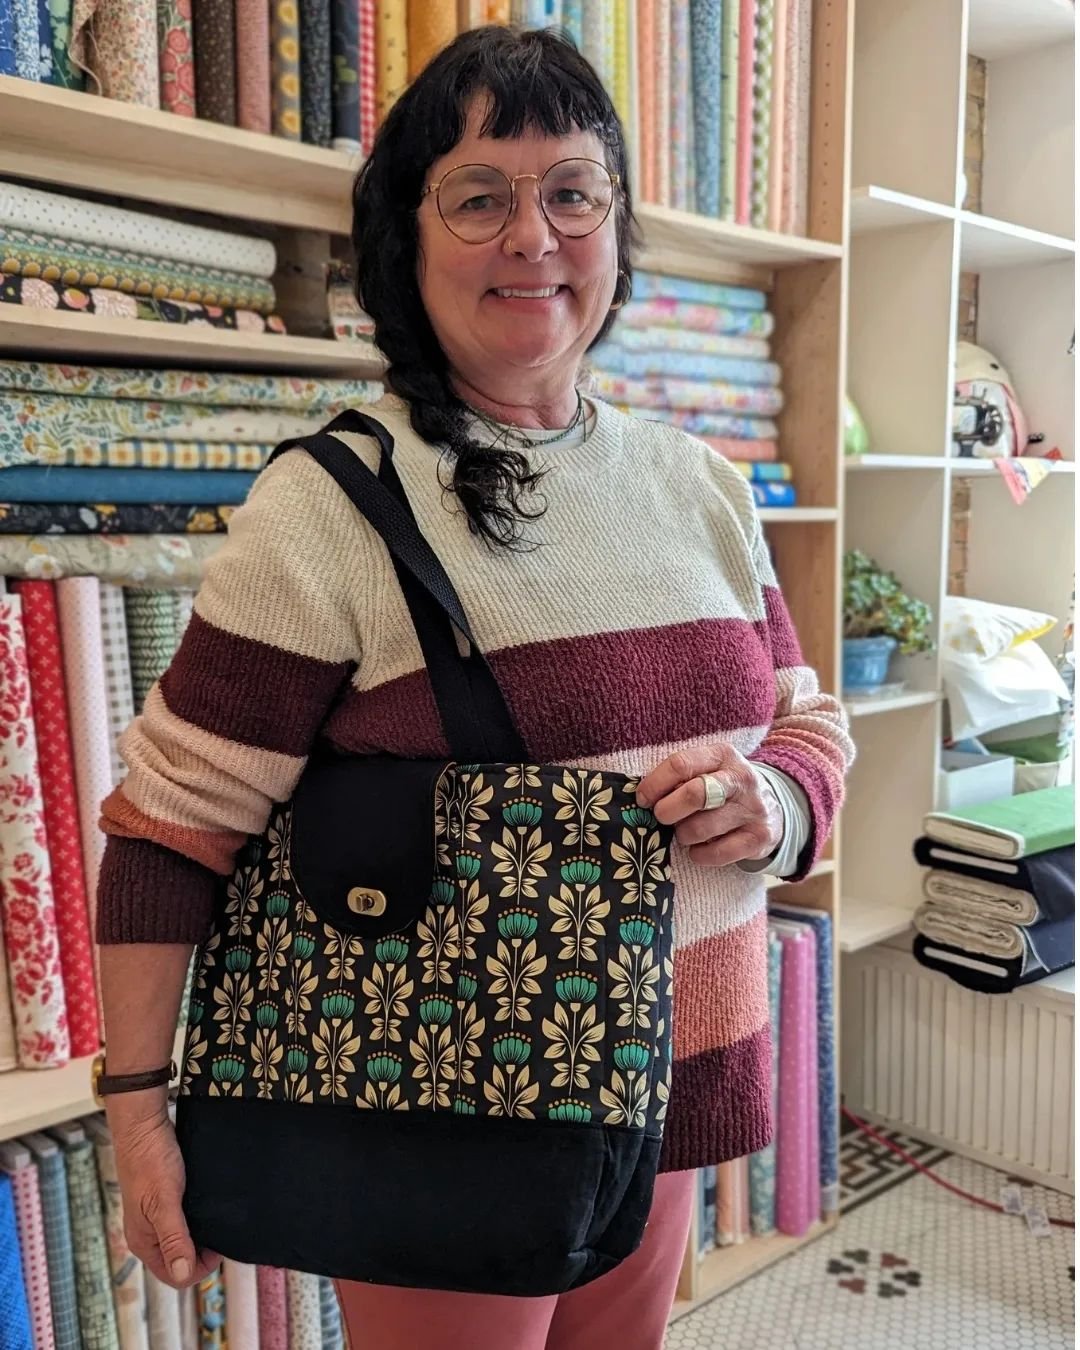 Our Adult Bag Making class wrapped up these gorgeous and so useful @noodlehead531 Explorer Totes last week, and they turned out beautifully ! So proud of our students 💓 This week we'll start the Oxbow Tote! We still have a couple spaces left, come j